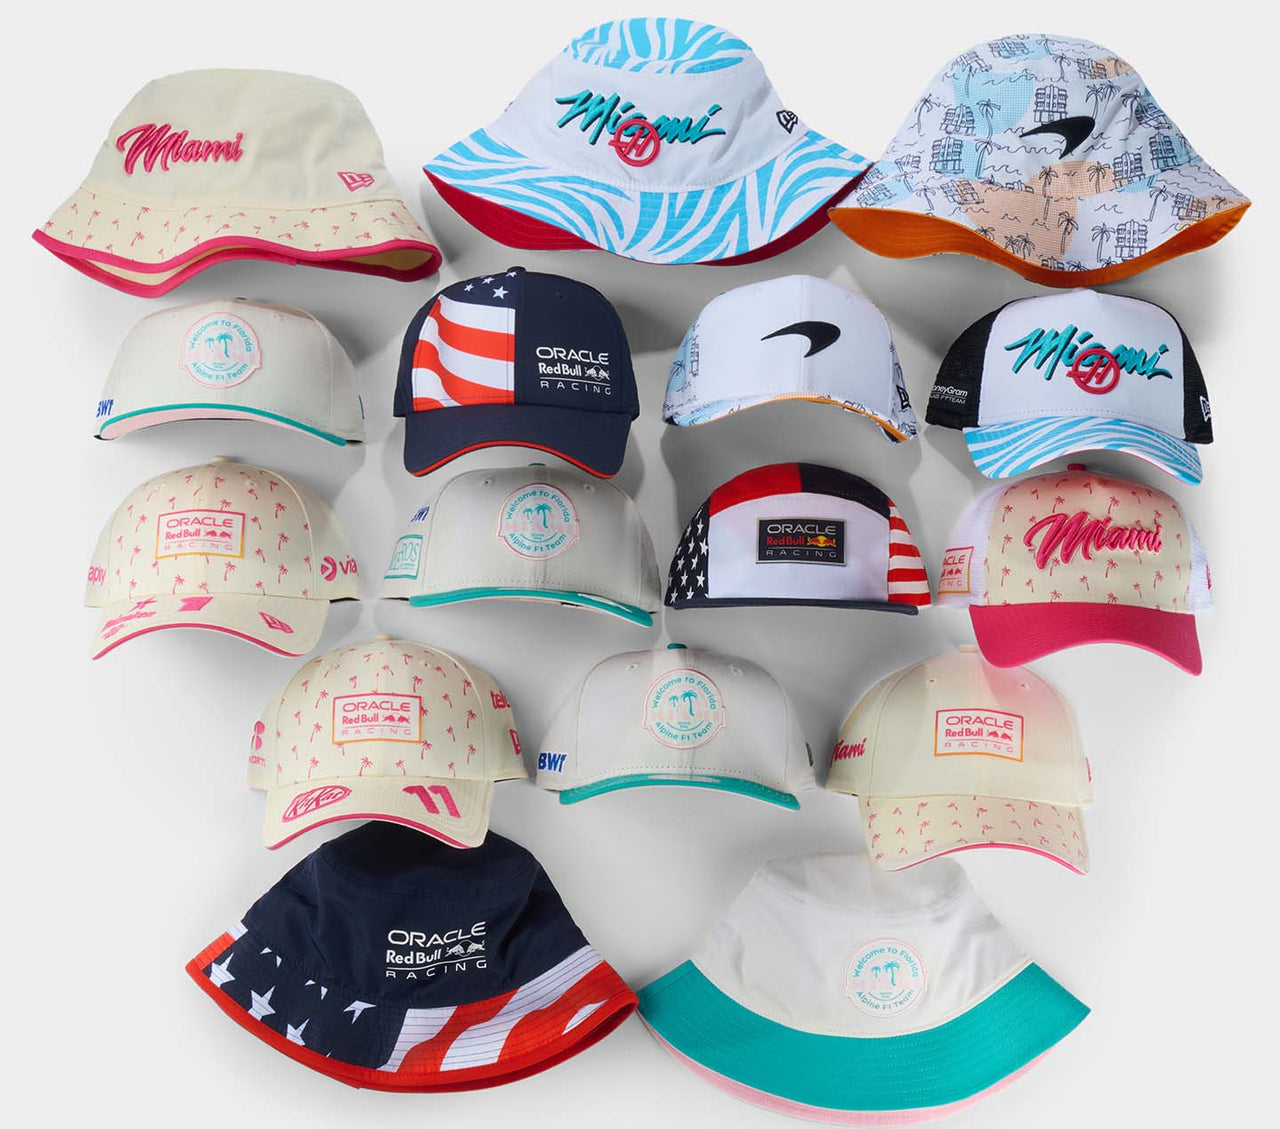 Shop the Miami Race Specials collection